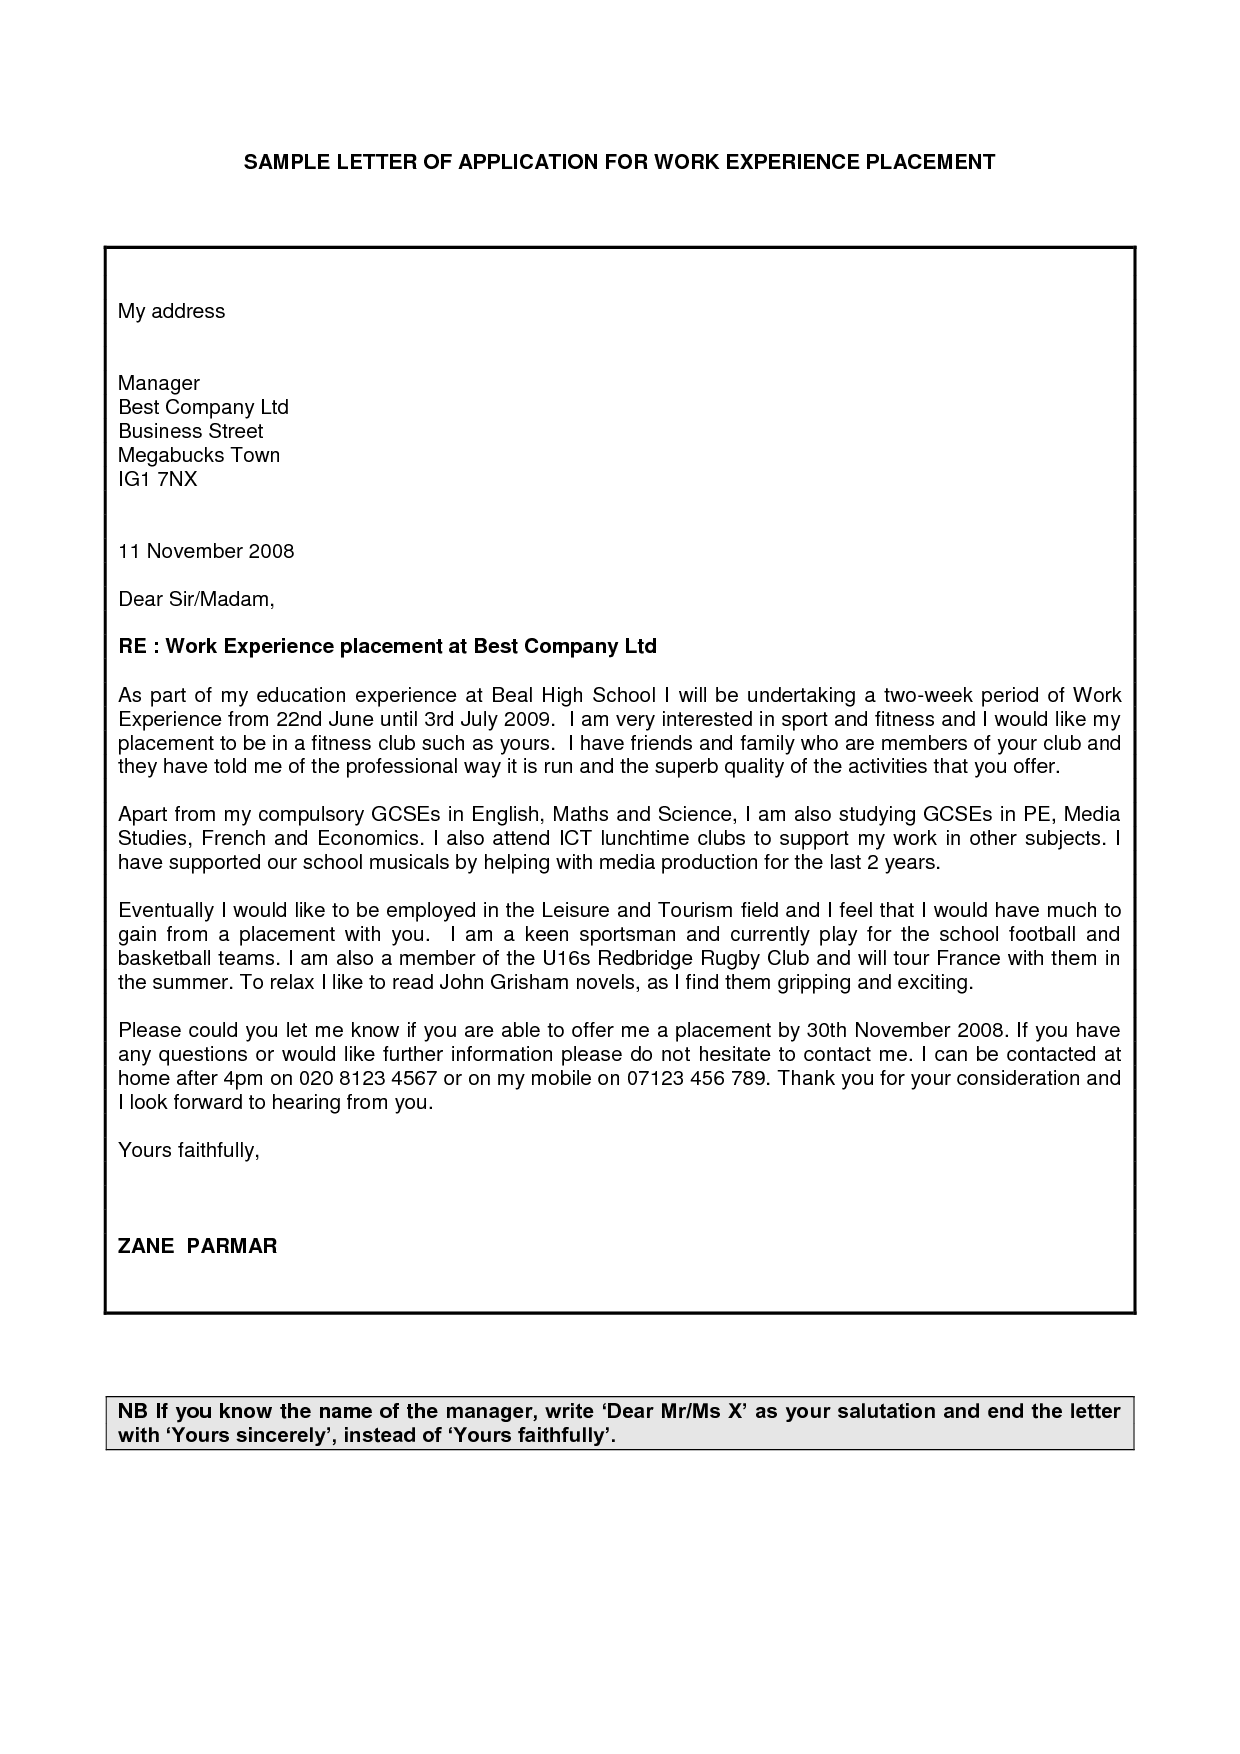 Careers: sample letter requesting work experience placement